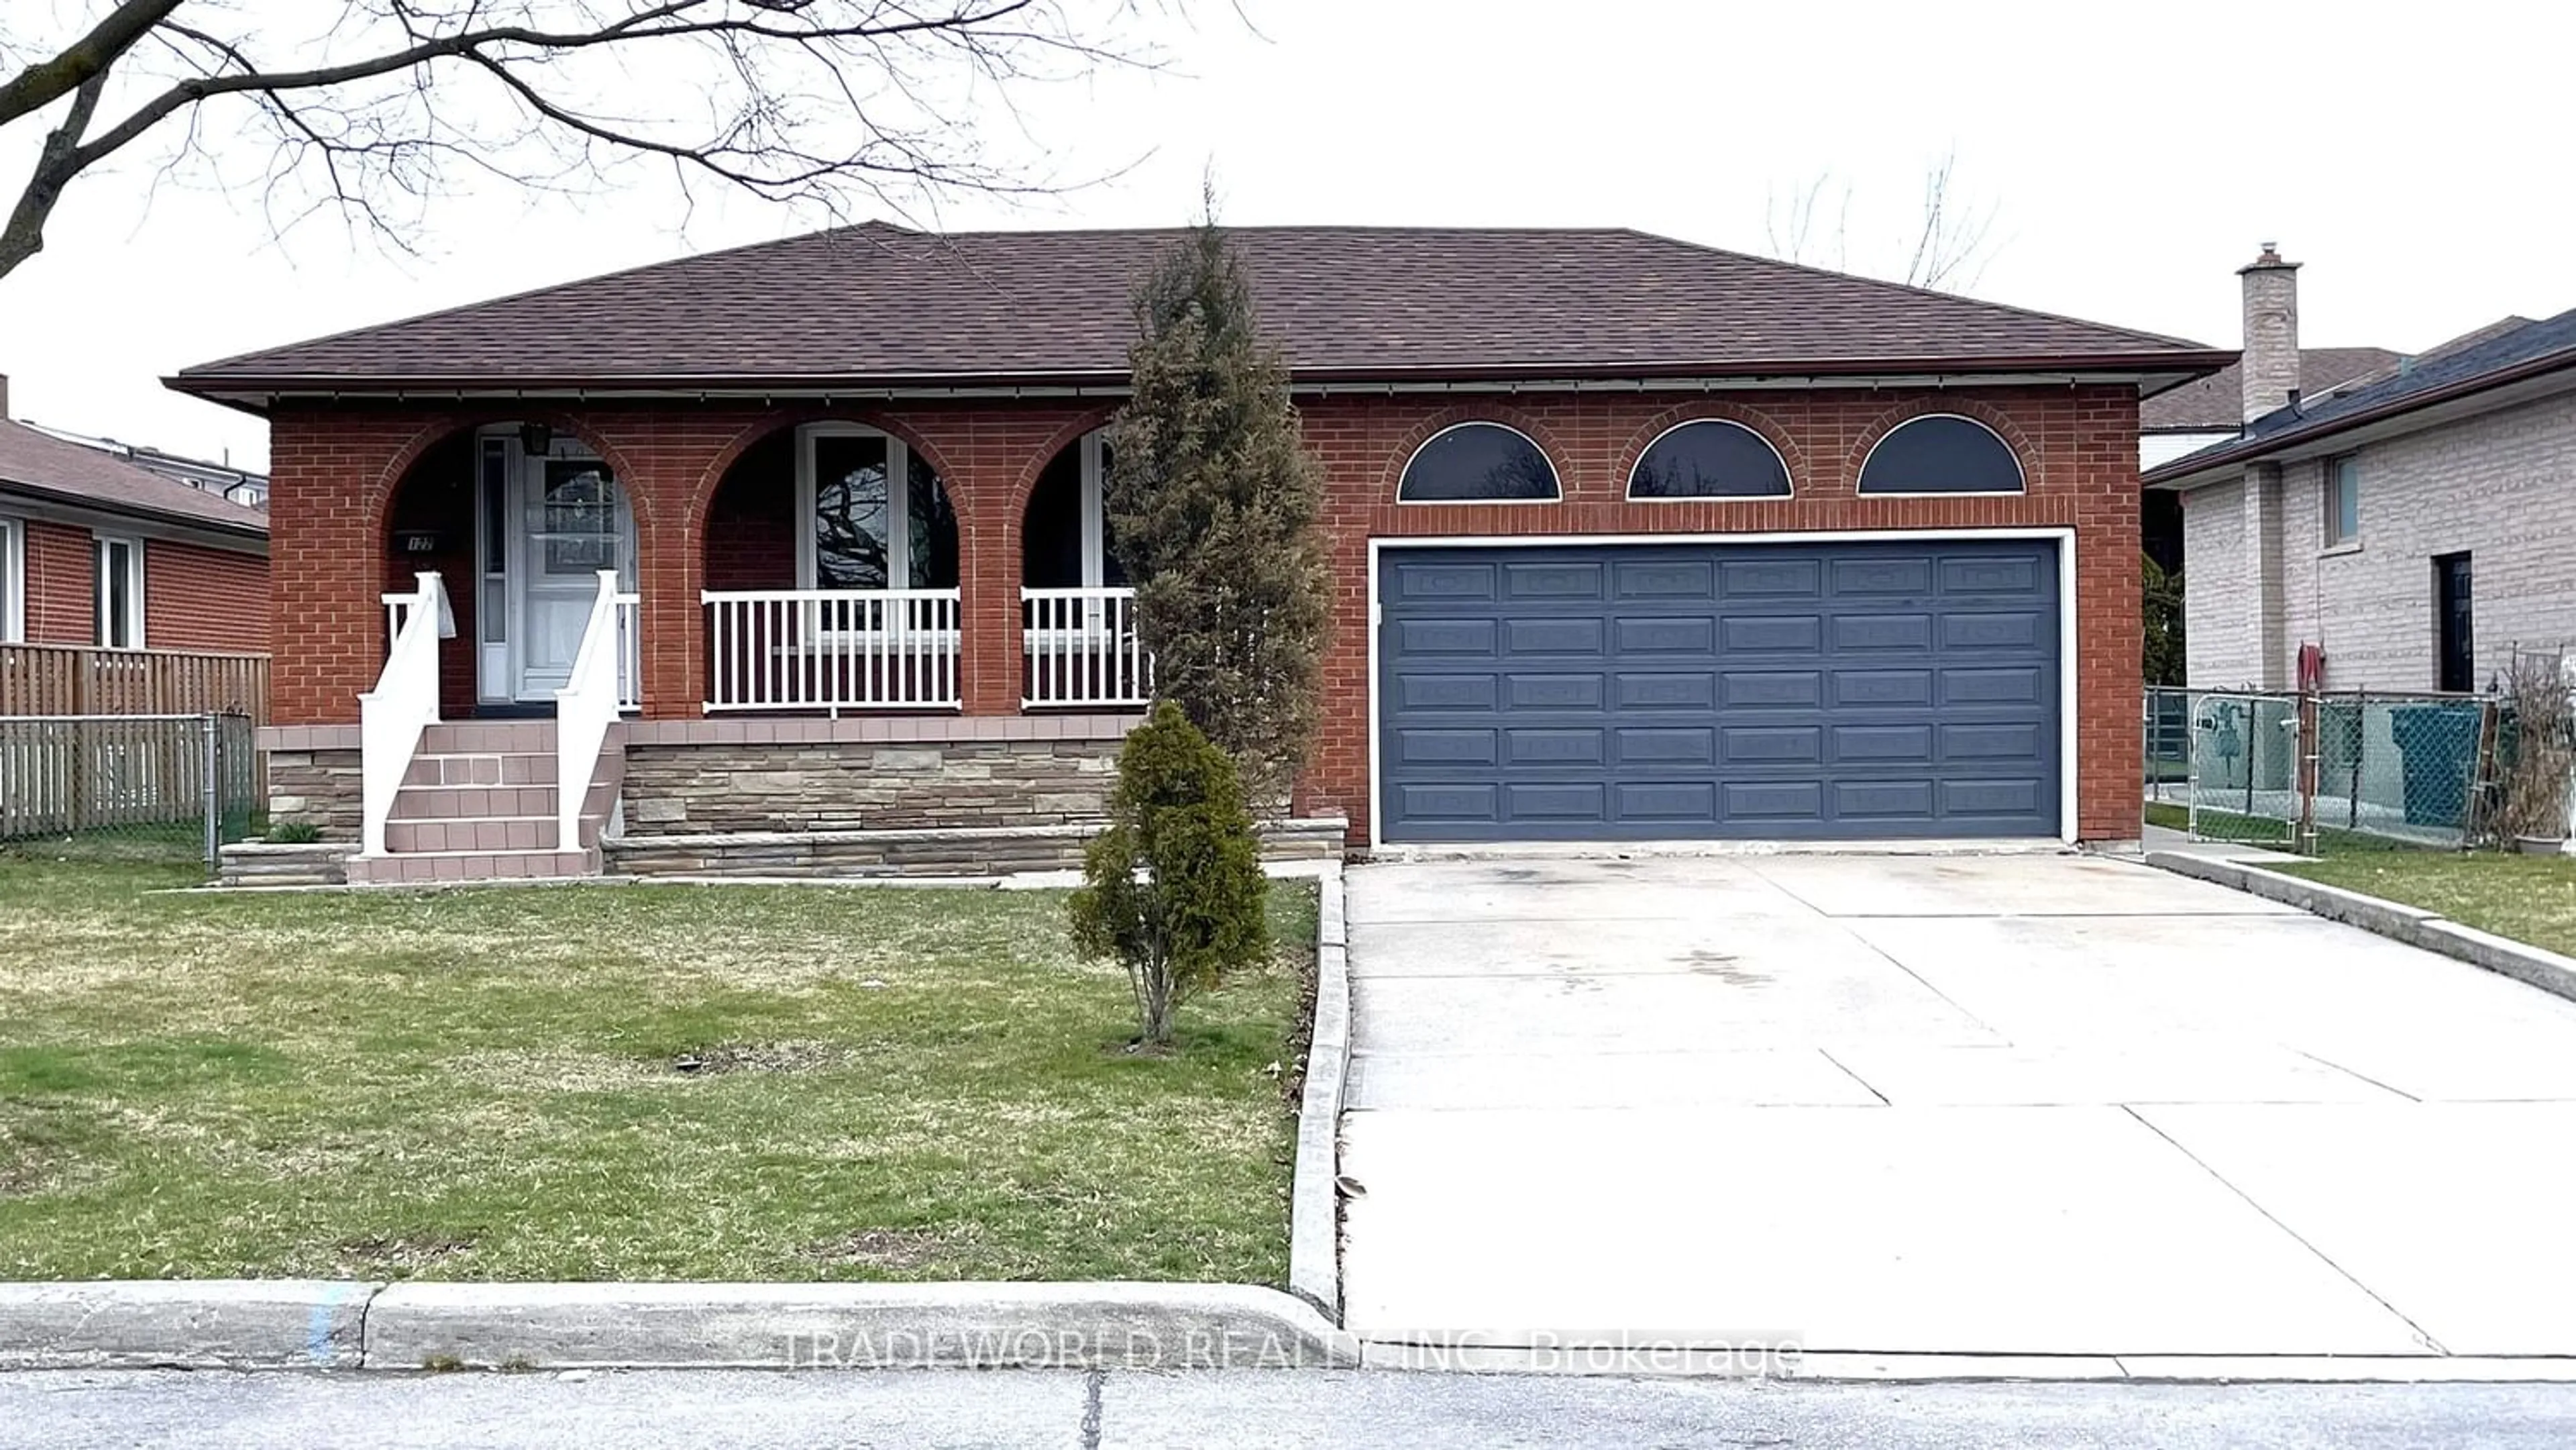 Home with brick exterior material for 122 Honeywood Rd, Toronto Ontario M3N 1B4